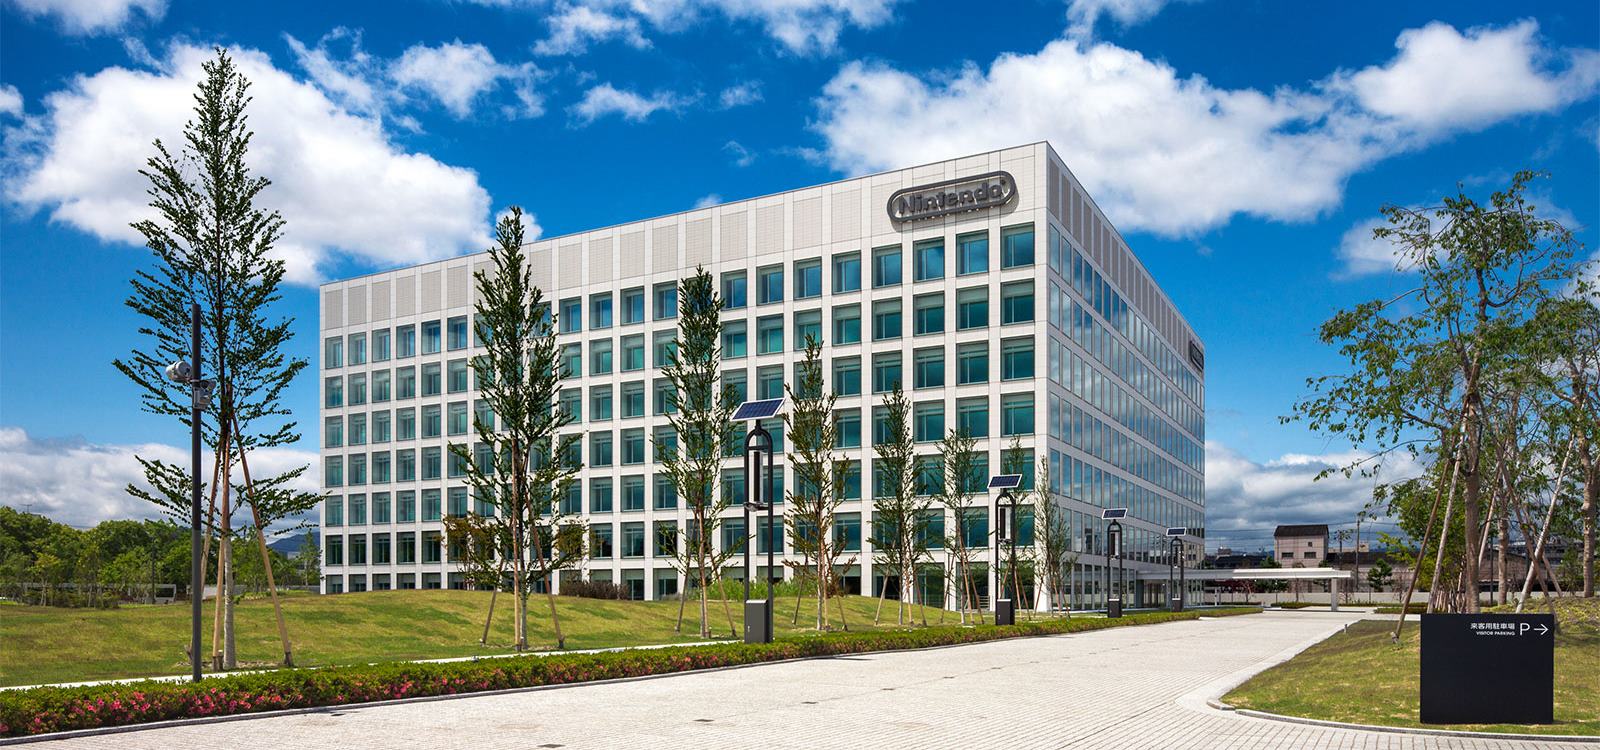 A small fire reportedly breaks out at Nintendo headquarters’ Development Center